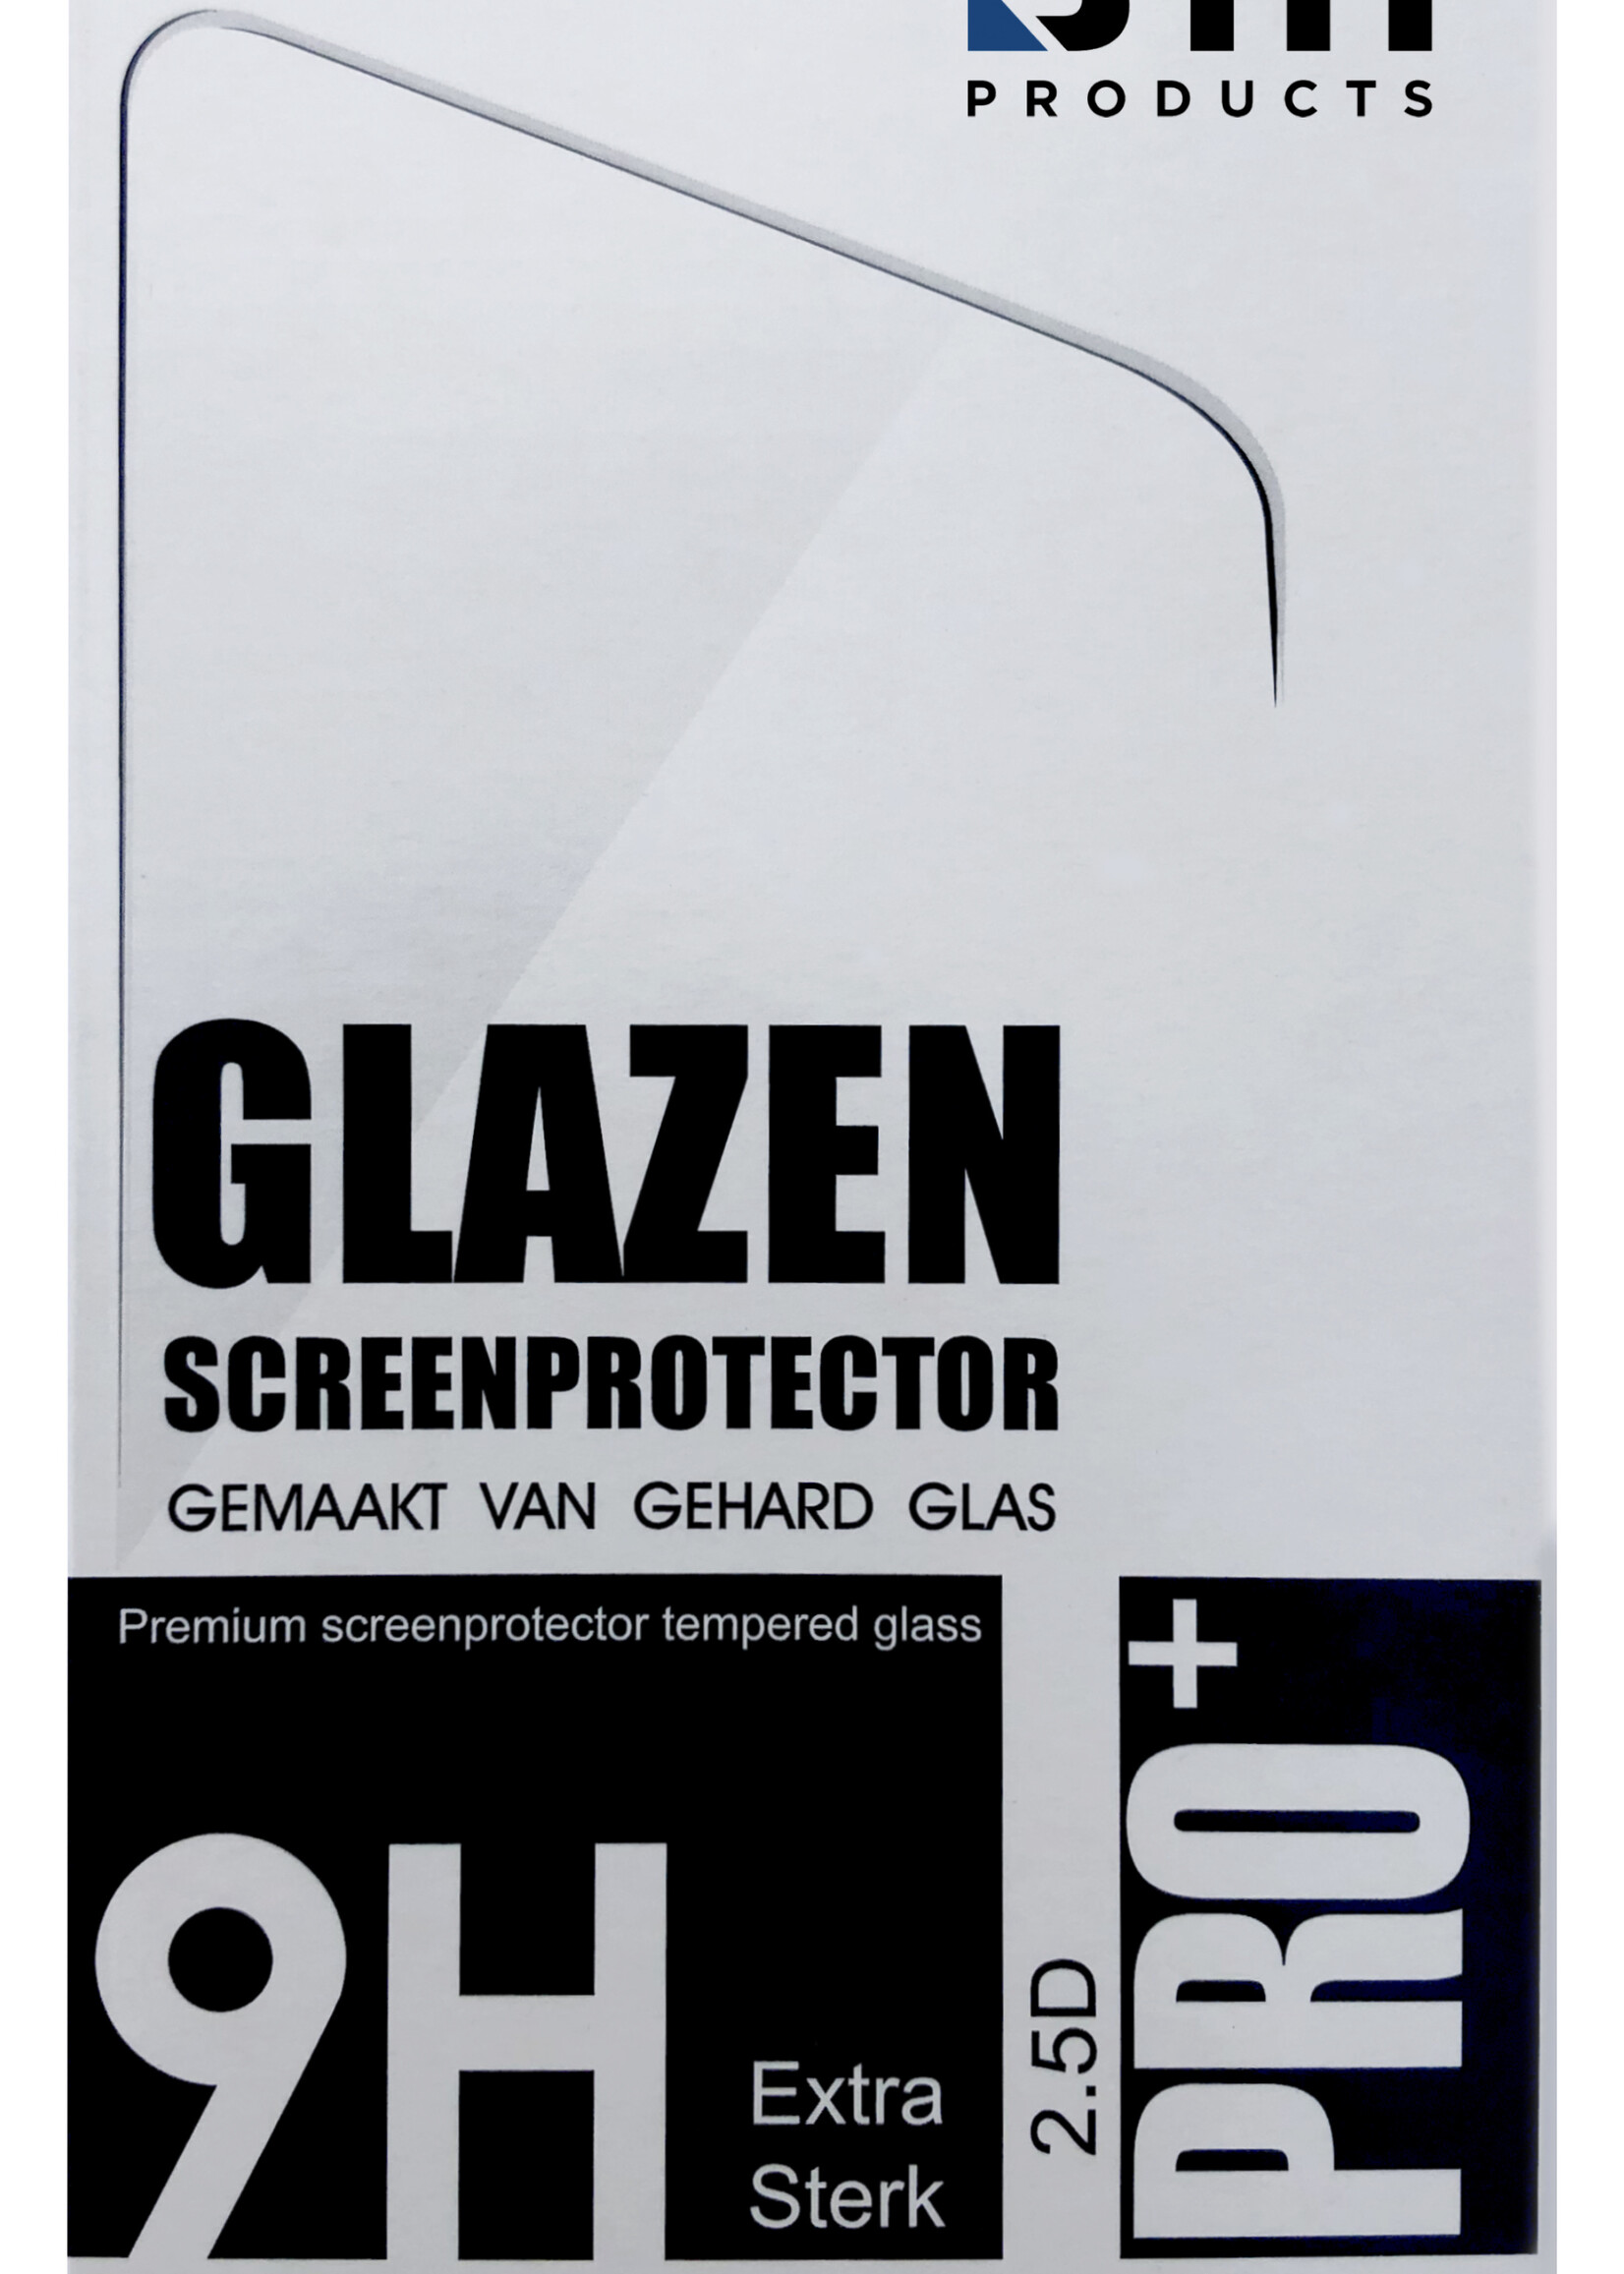 BTH Screenprotector Geschikt voor Samsung S22 Screenprotector Privacy Glas Gehard Full Cover - Screenprotector Geschikt voor Samsung Galaxy S22 Screenprotector Privacy Tempered Glass - 3 PACK